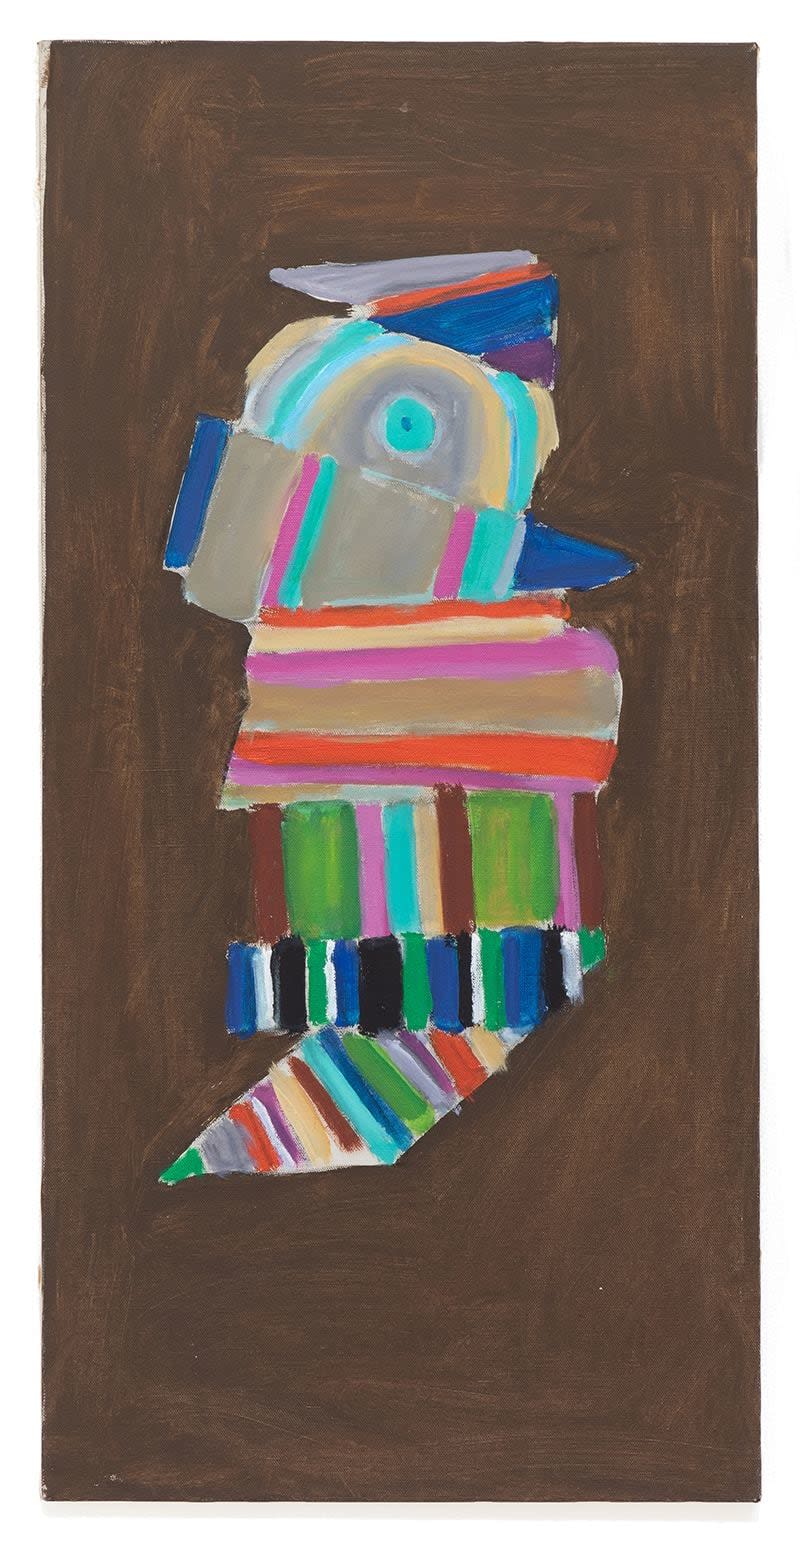 Betty Parsons, Untitled (Puppet), 1978